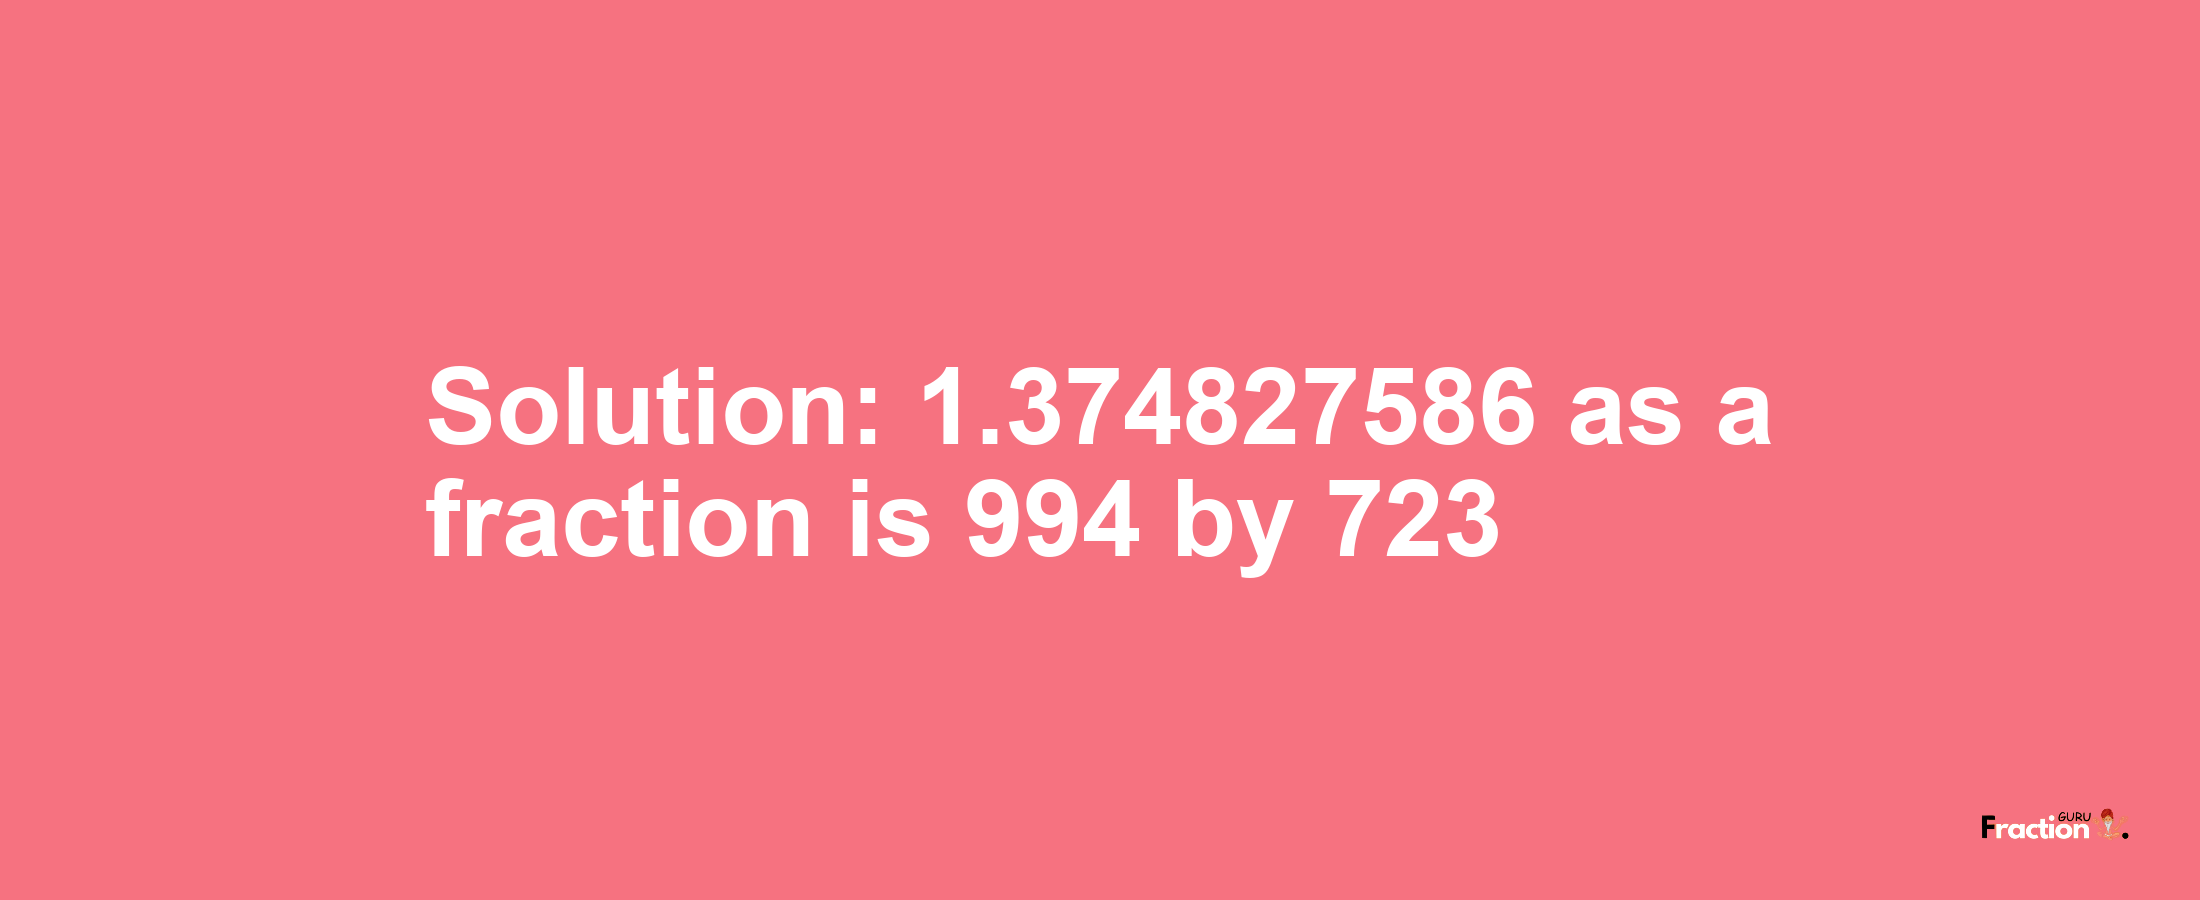 Solution:1.374827586 as a fraction is 994/723